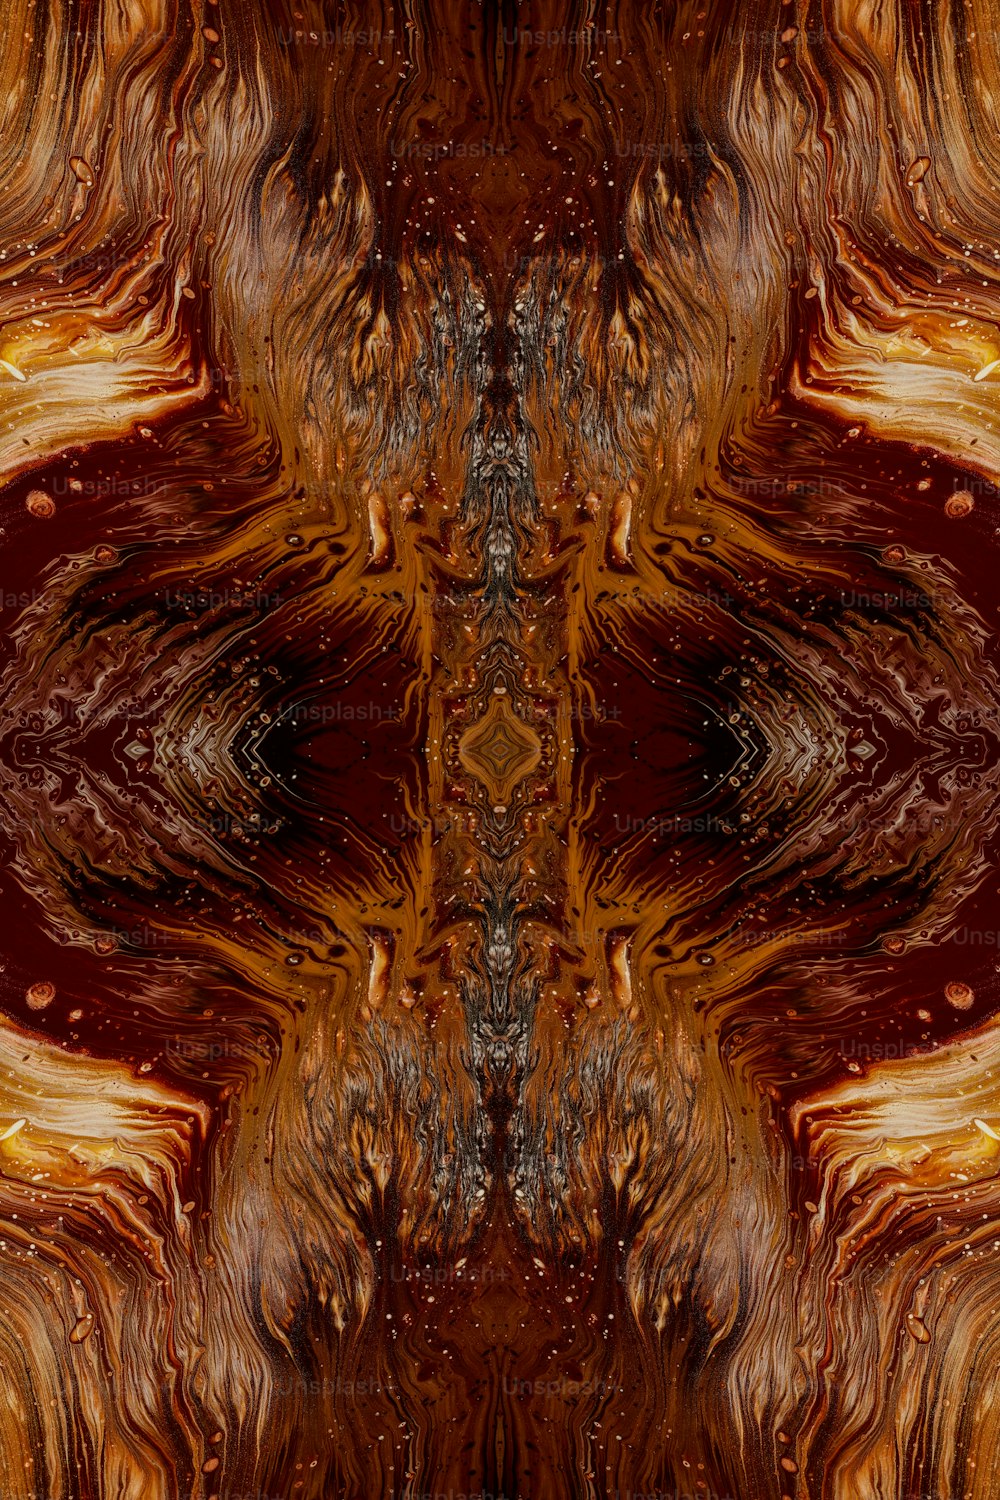 an abstract image of a brown and orange pattern